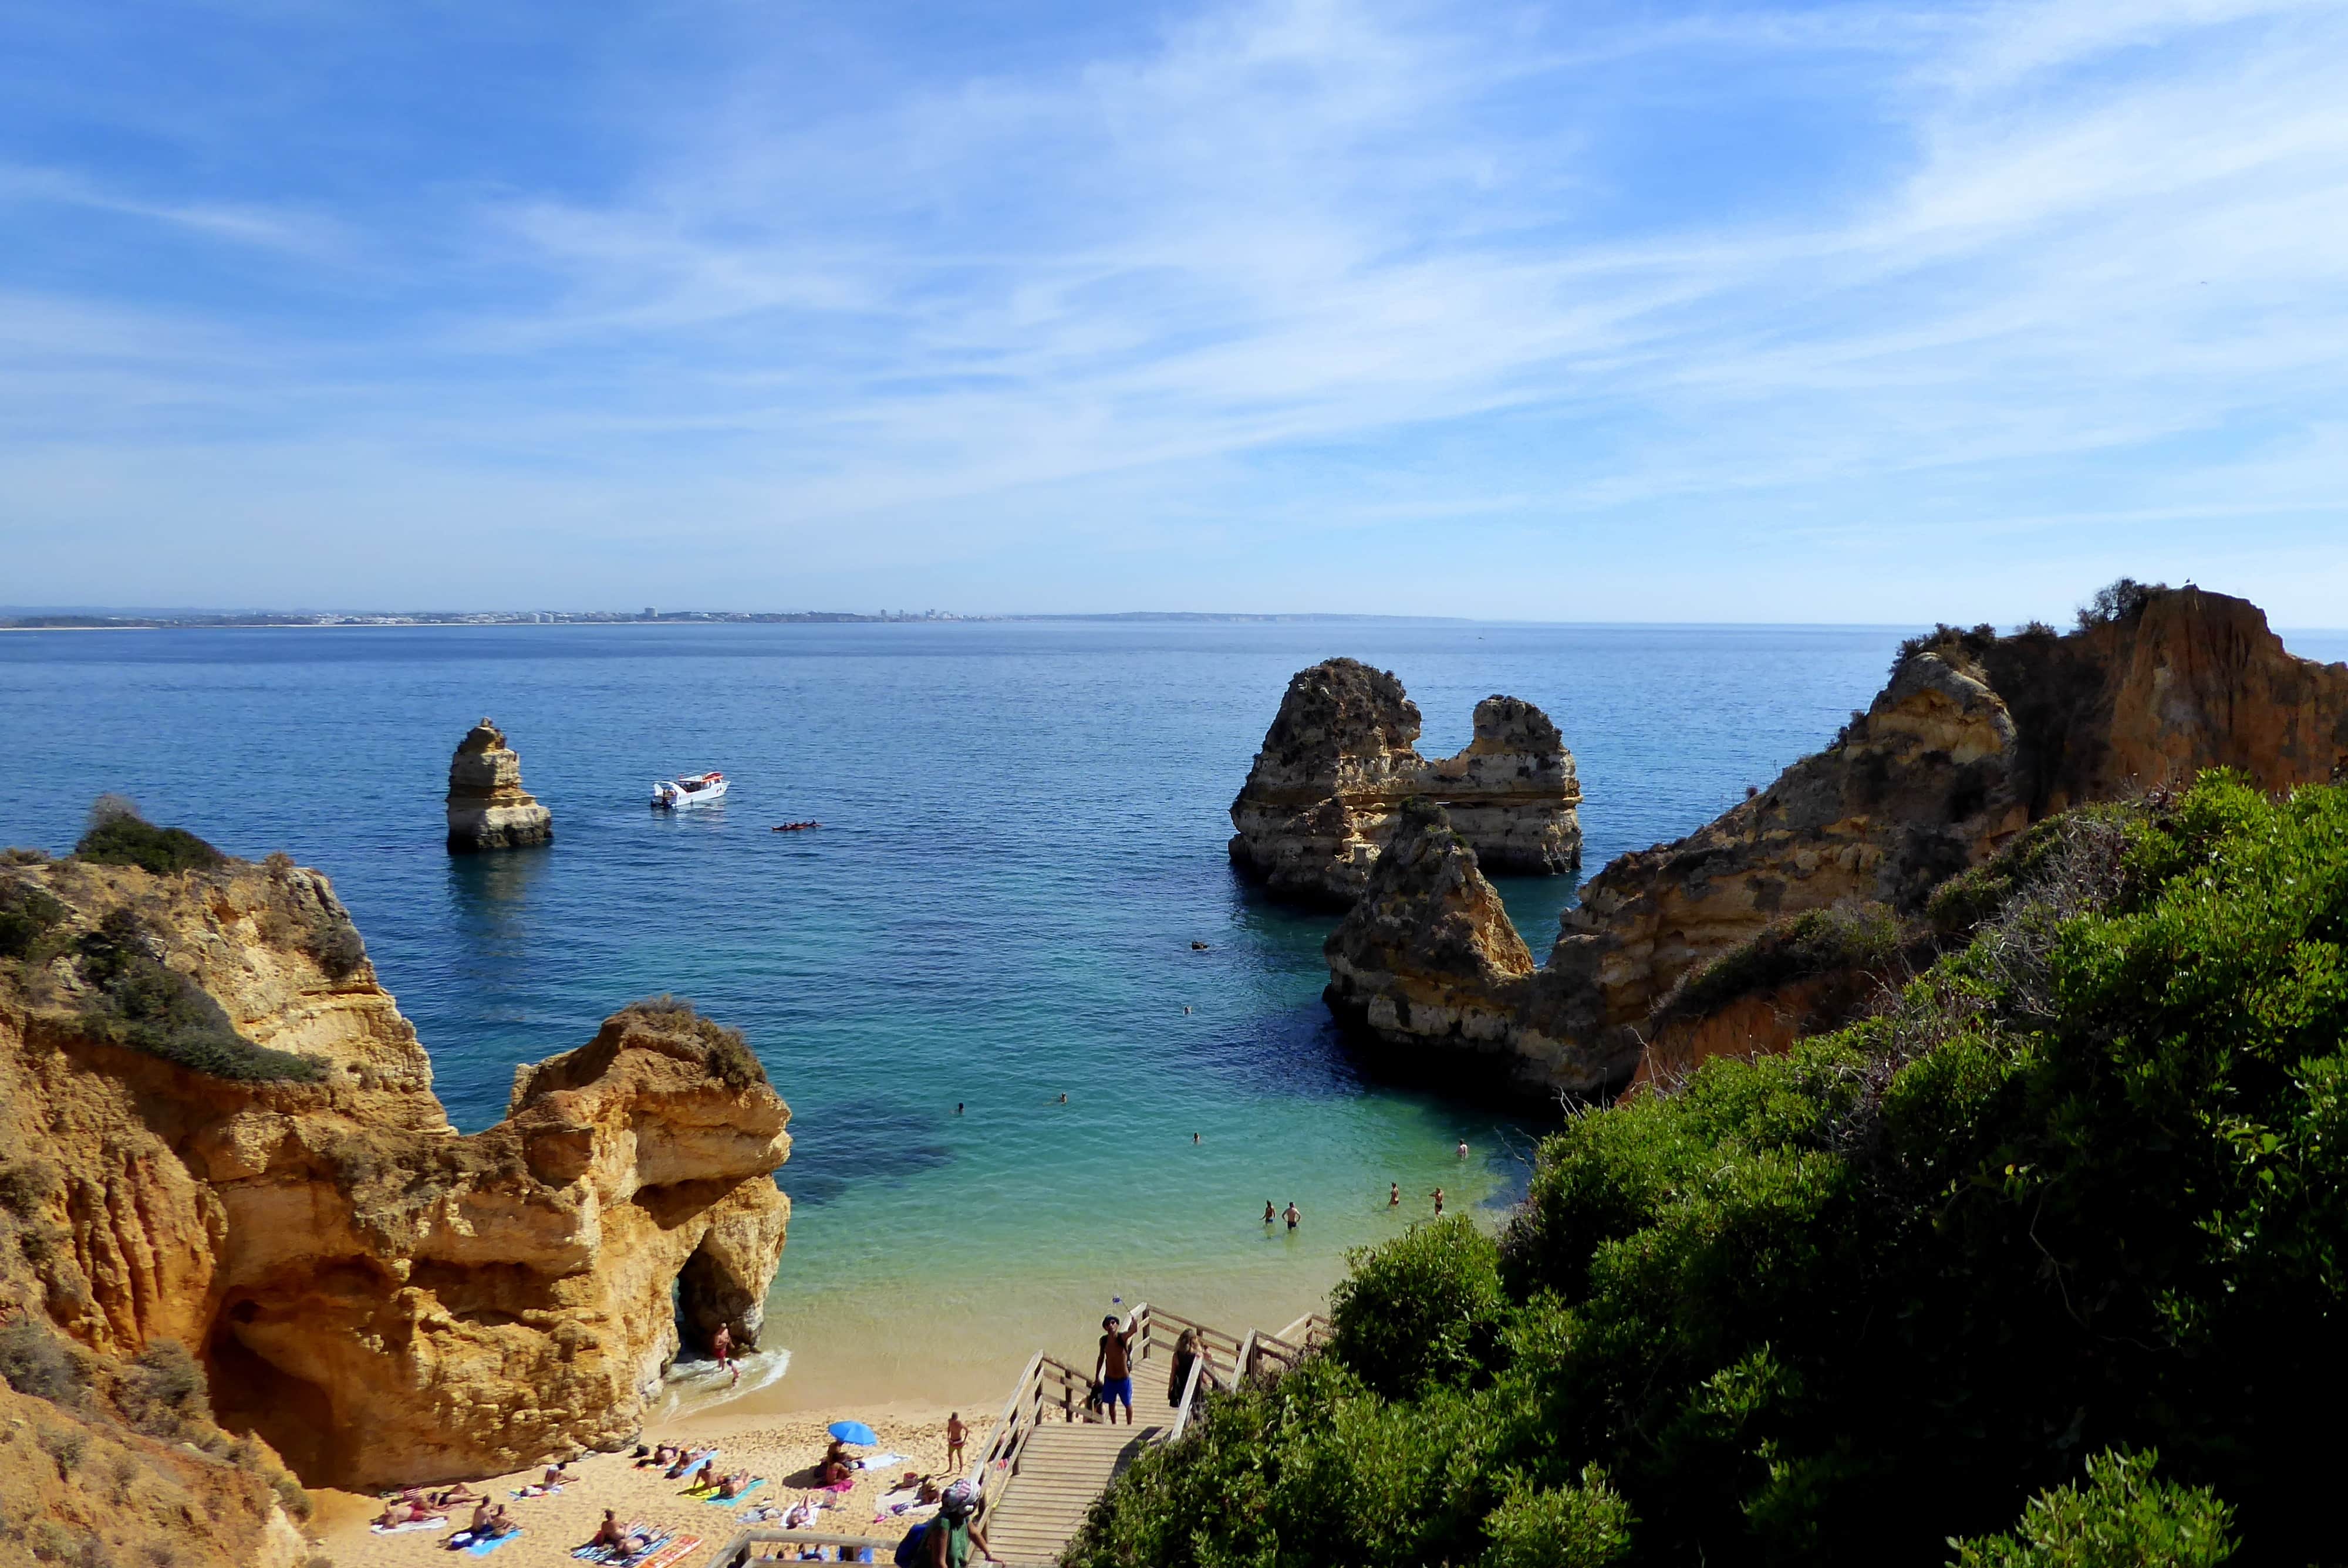 The beautiful Lagos Beach in the Algarve of Portugal